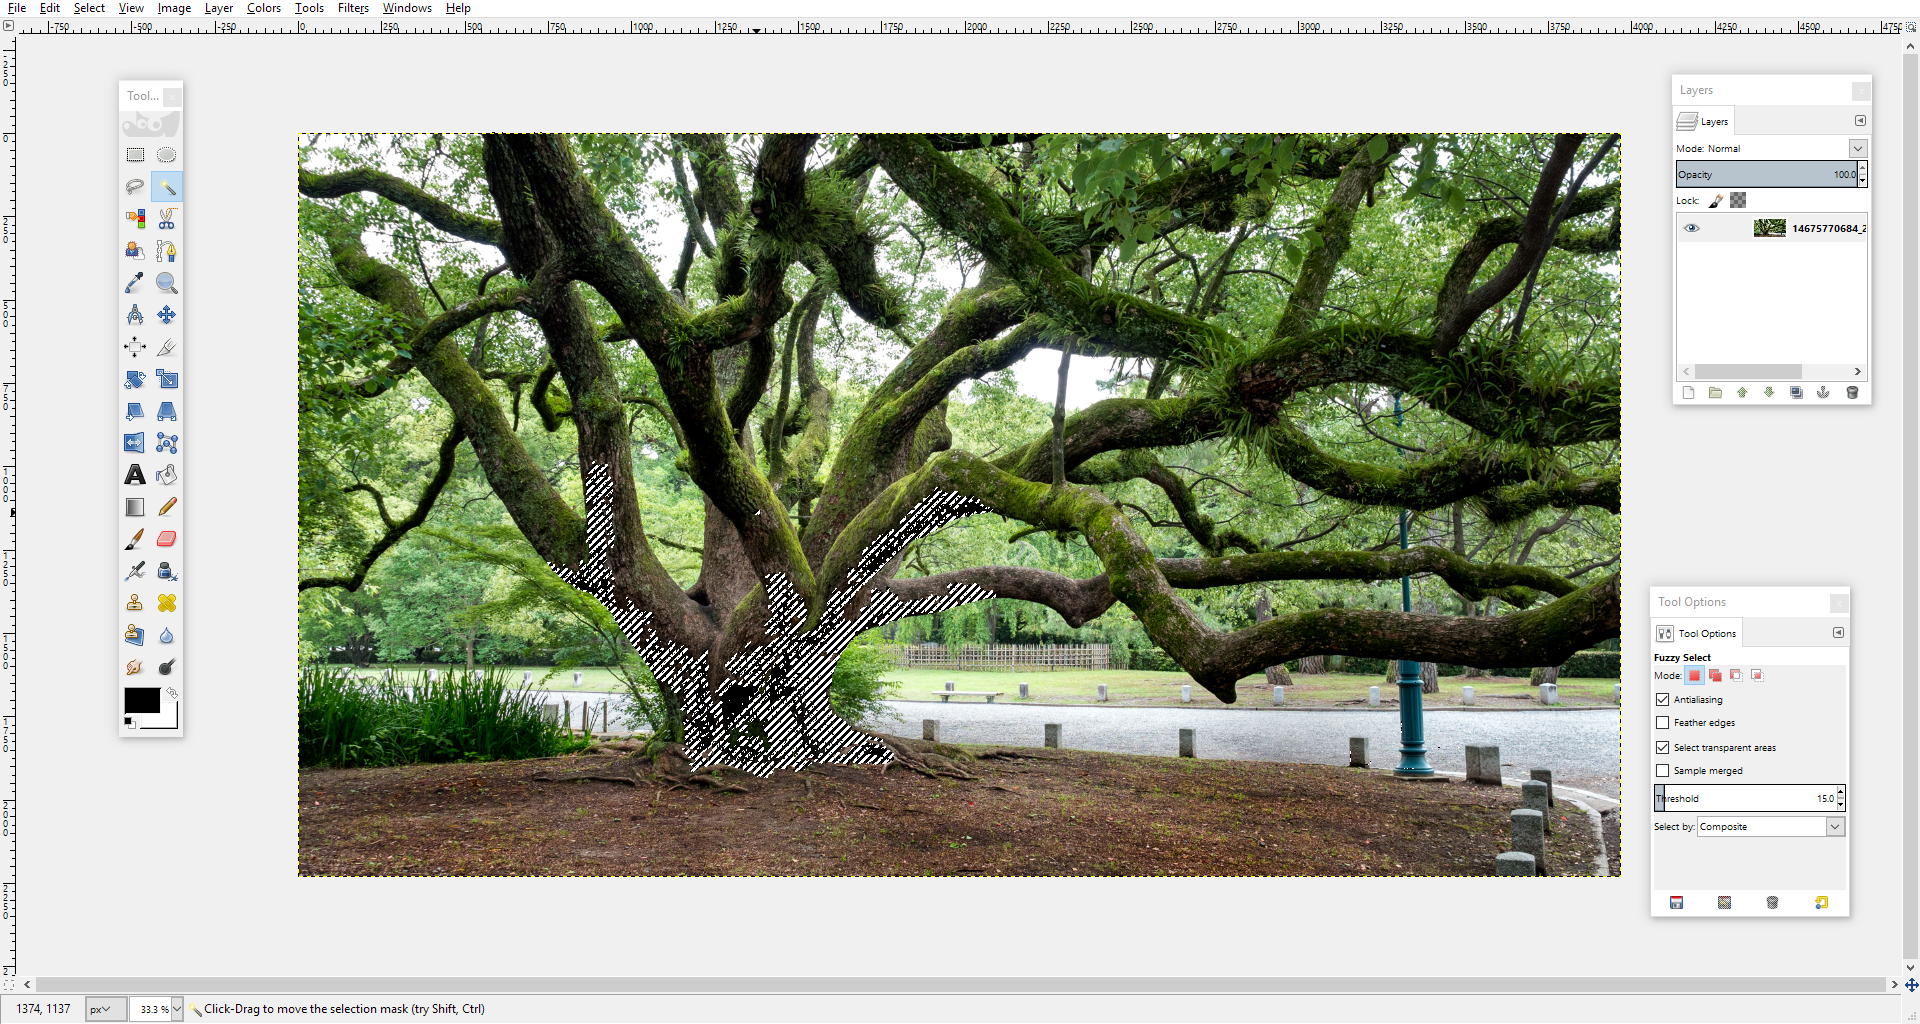 GIMP screenshot - building a PC for photo editing and graphic design